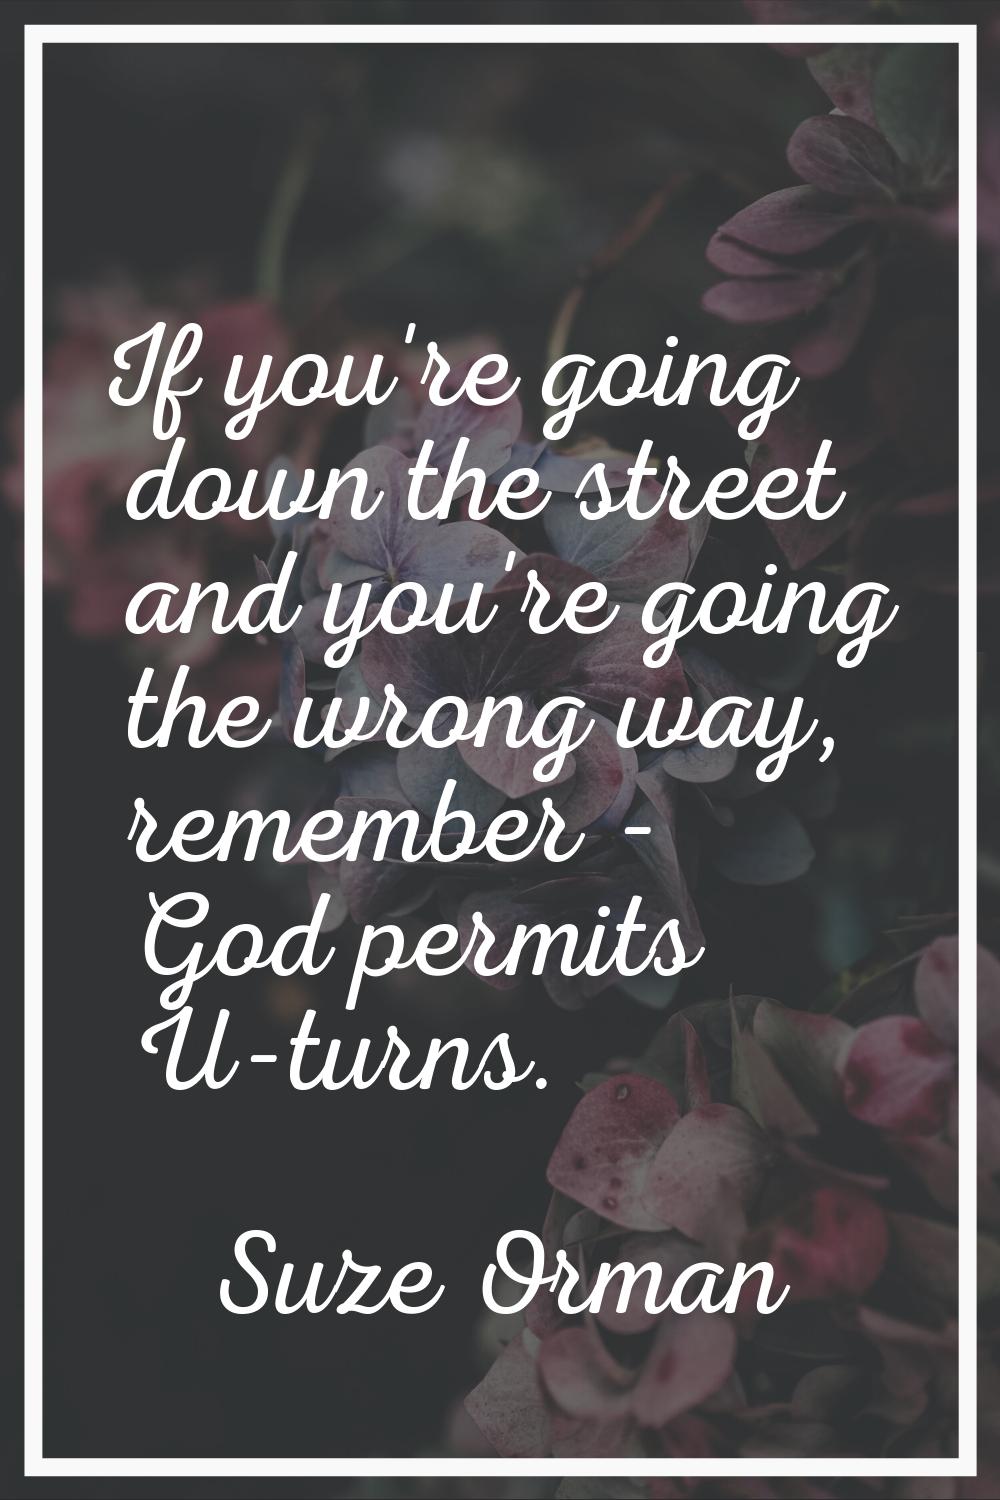 If you're going down the street and you're going the wrong way, remember - God permits U-turns.